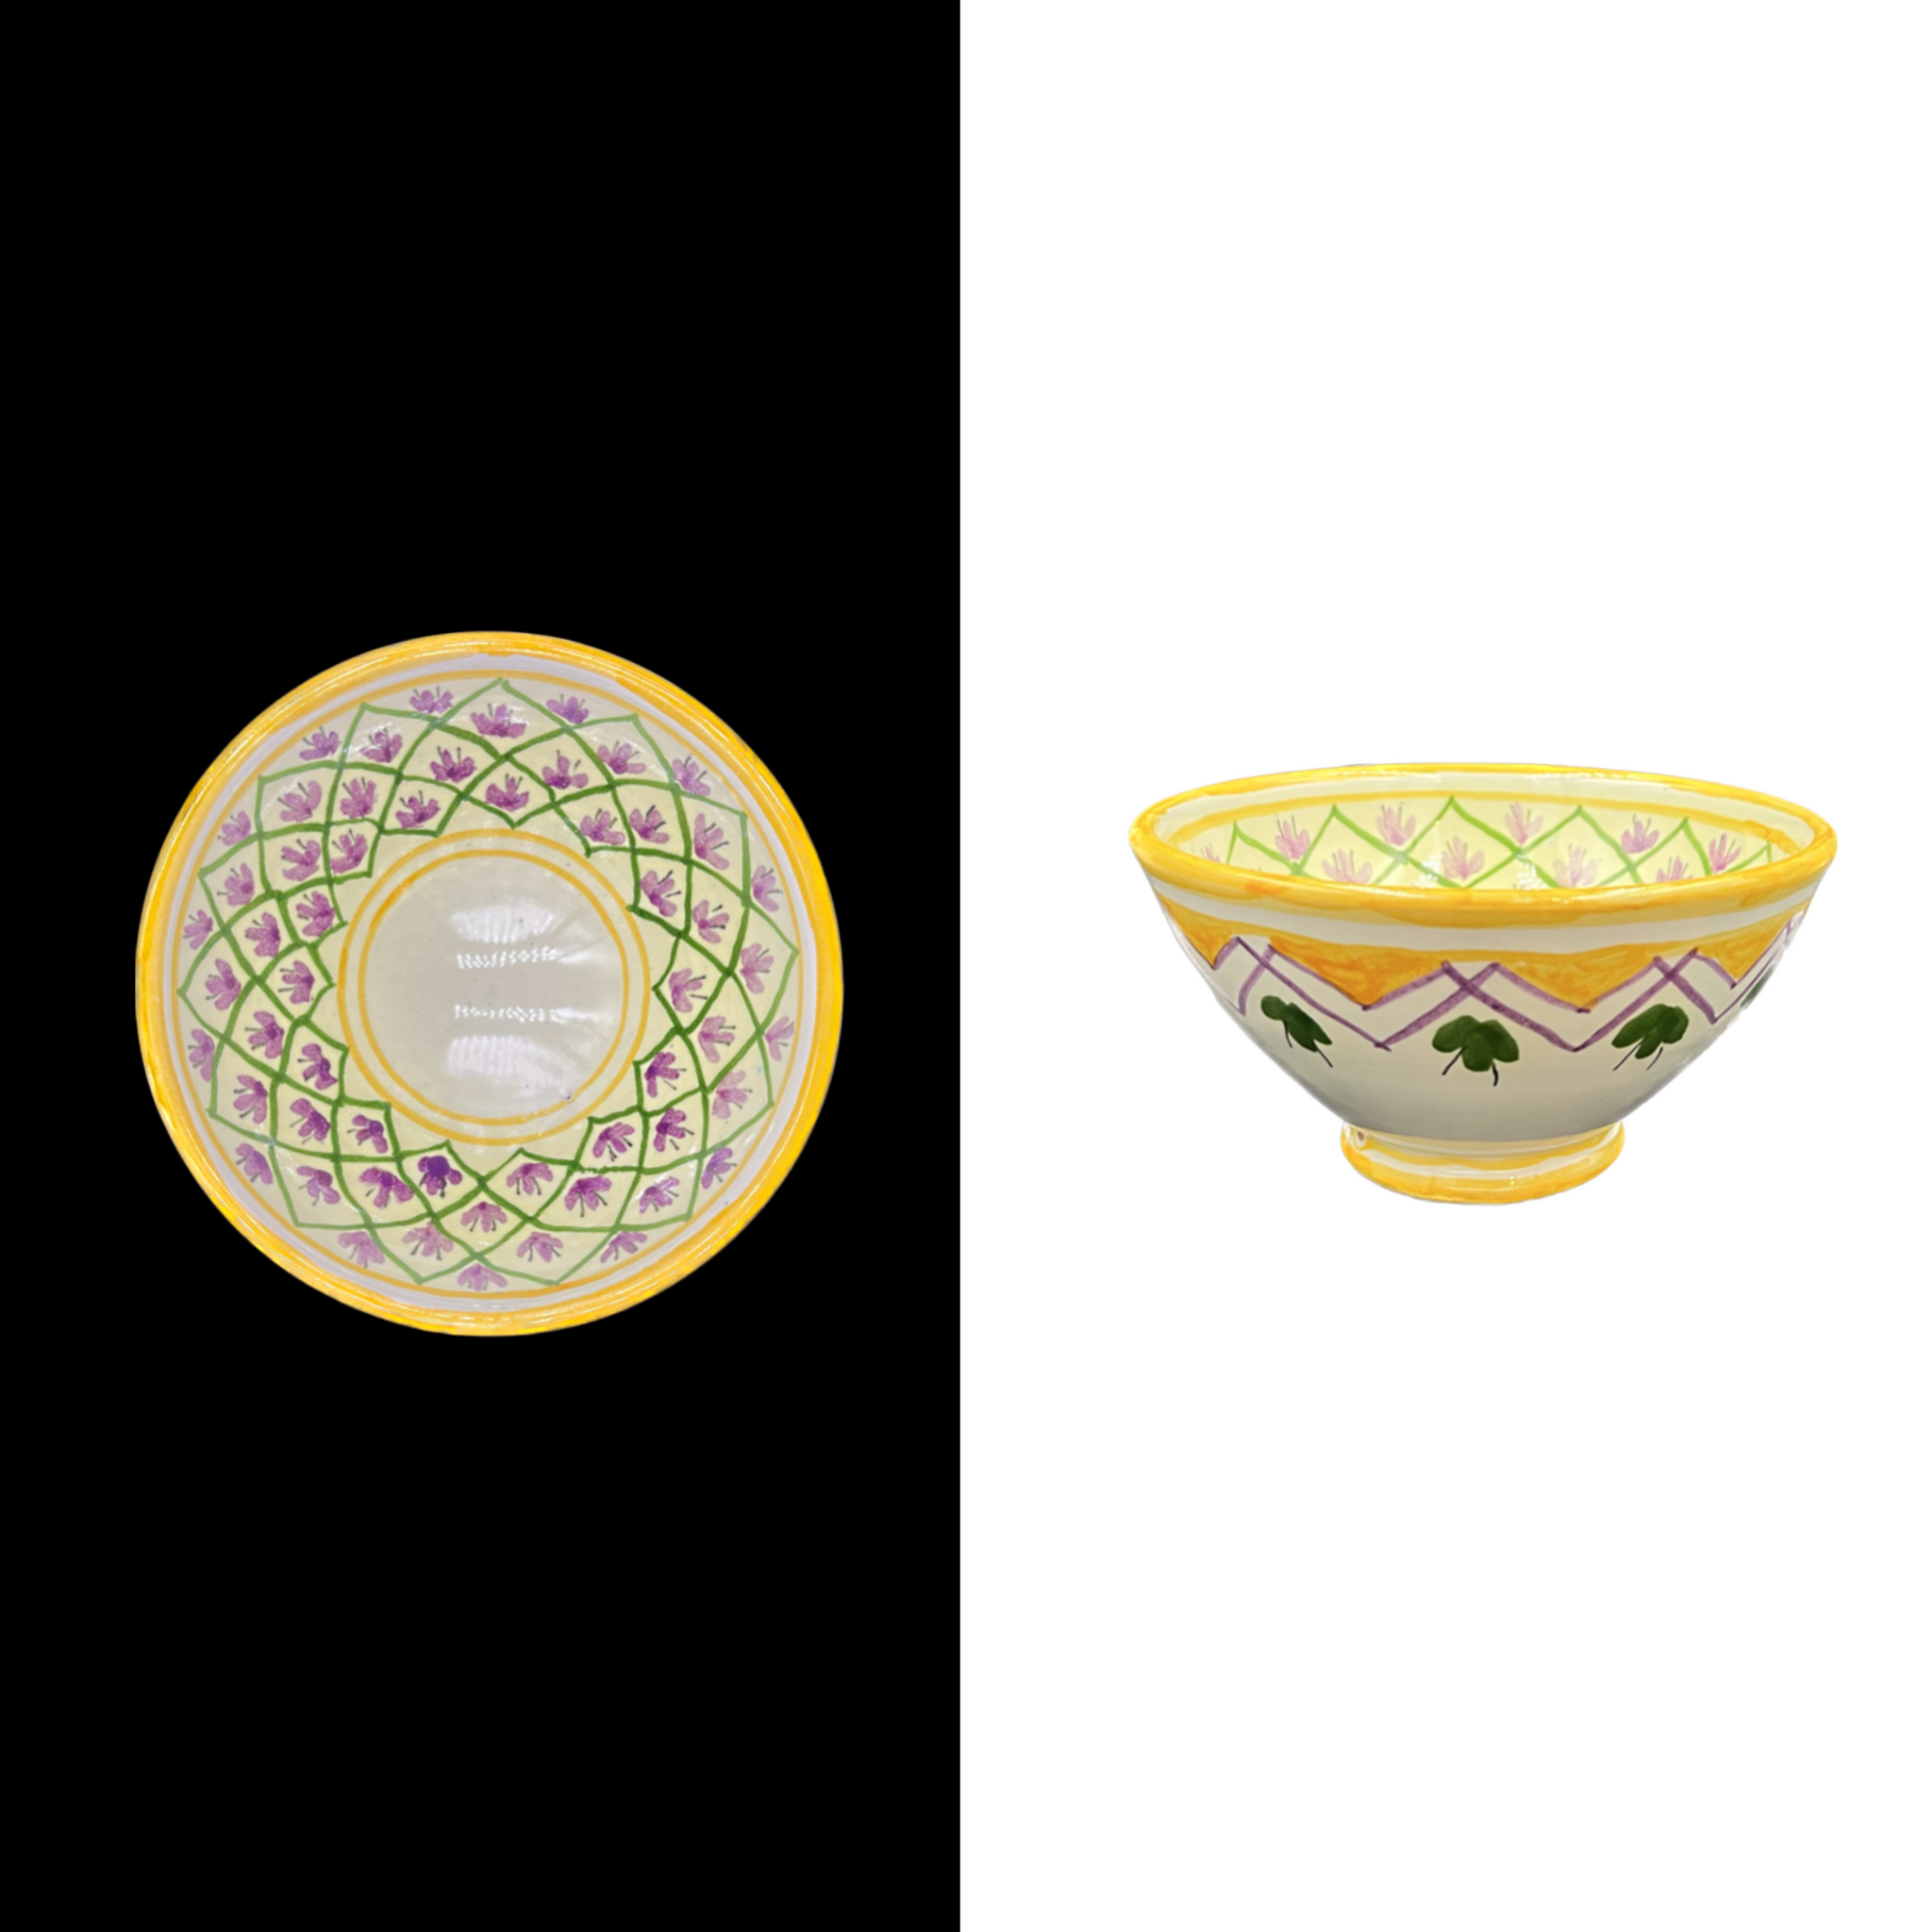 Ceramics from caceres yellow bowl